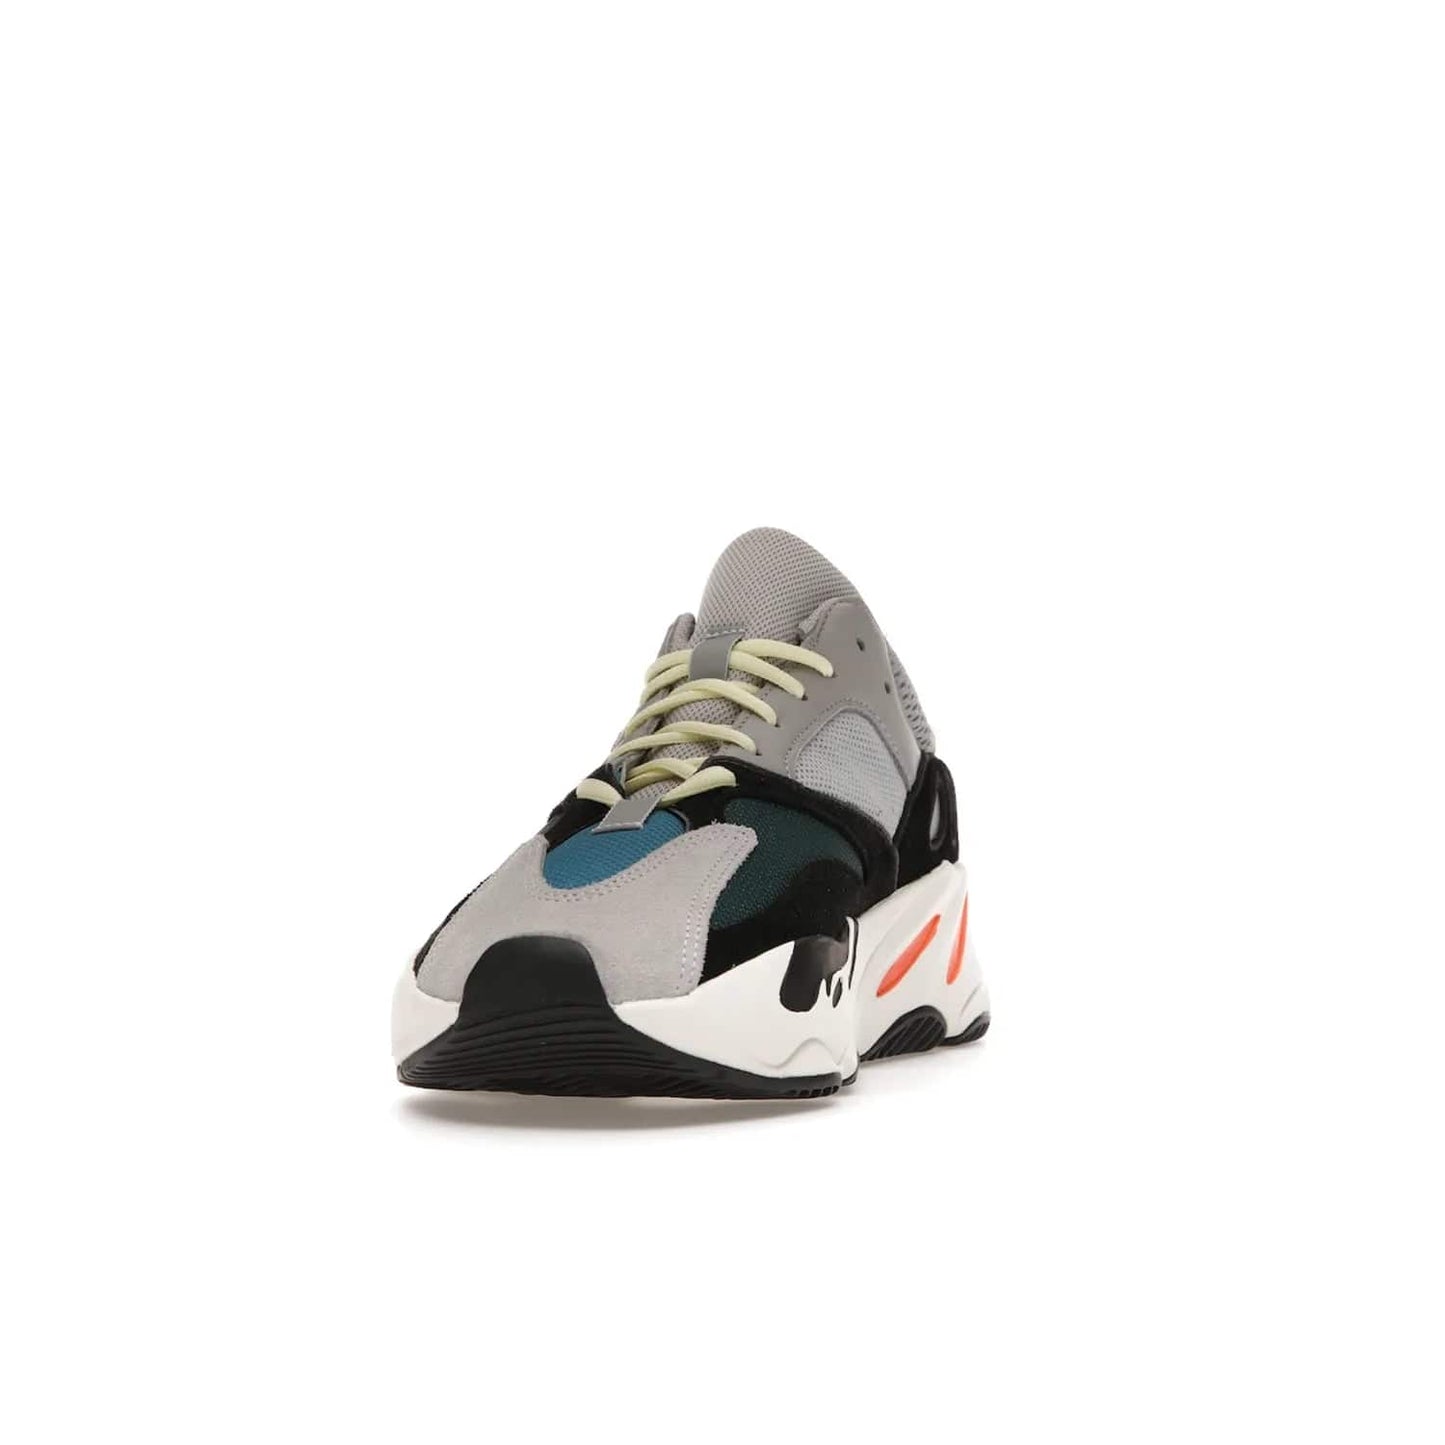 adidas Yeezy Boost 700 Wave Runner - Image 12 - Only at www.BallersClubKickz.com - Shop the iconic adidas Yeezy Boost 700 Wave Runner. Featuring grey mesh and leather upper, black suede overlays, teal mesh underlays, and signature Boost sole. Be bold & make a statement.